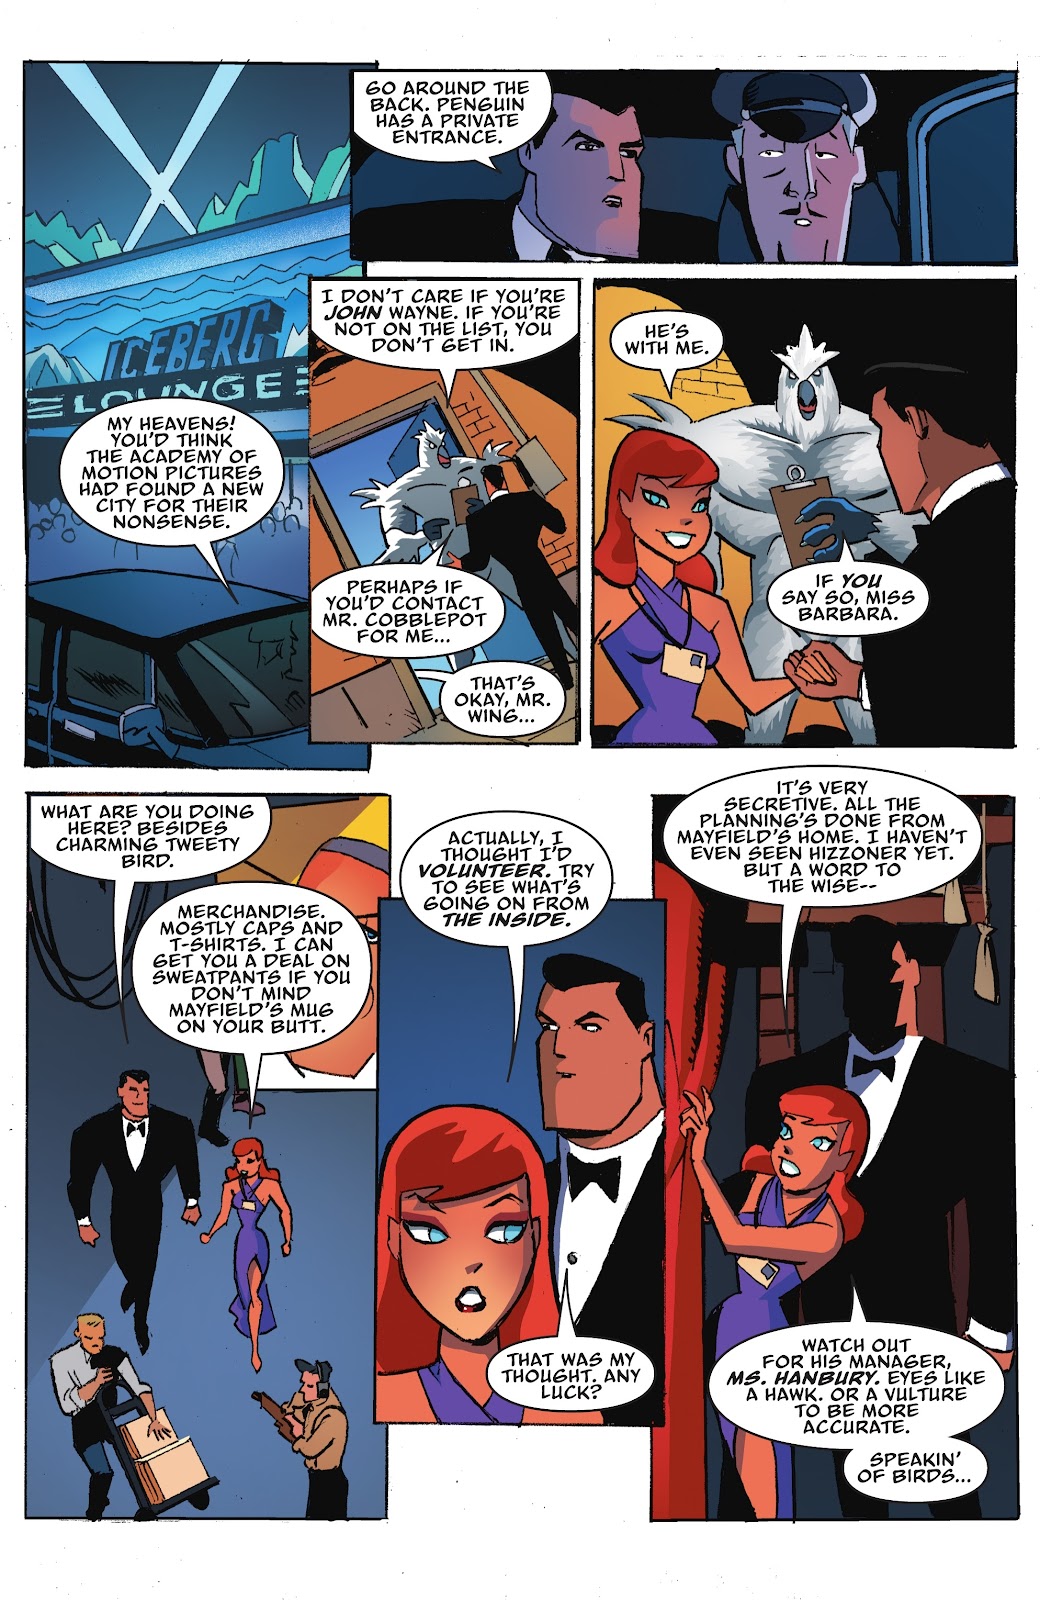 Batman: The Adventures Continue: Season Two issue 6 - Page 9